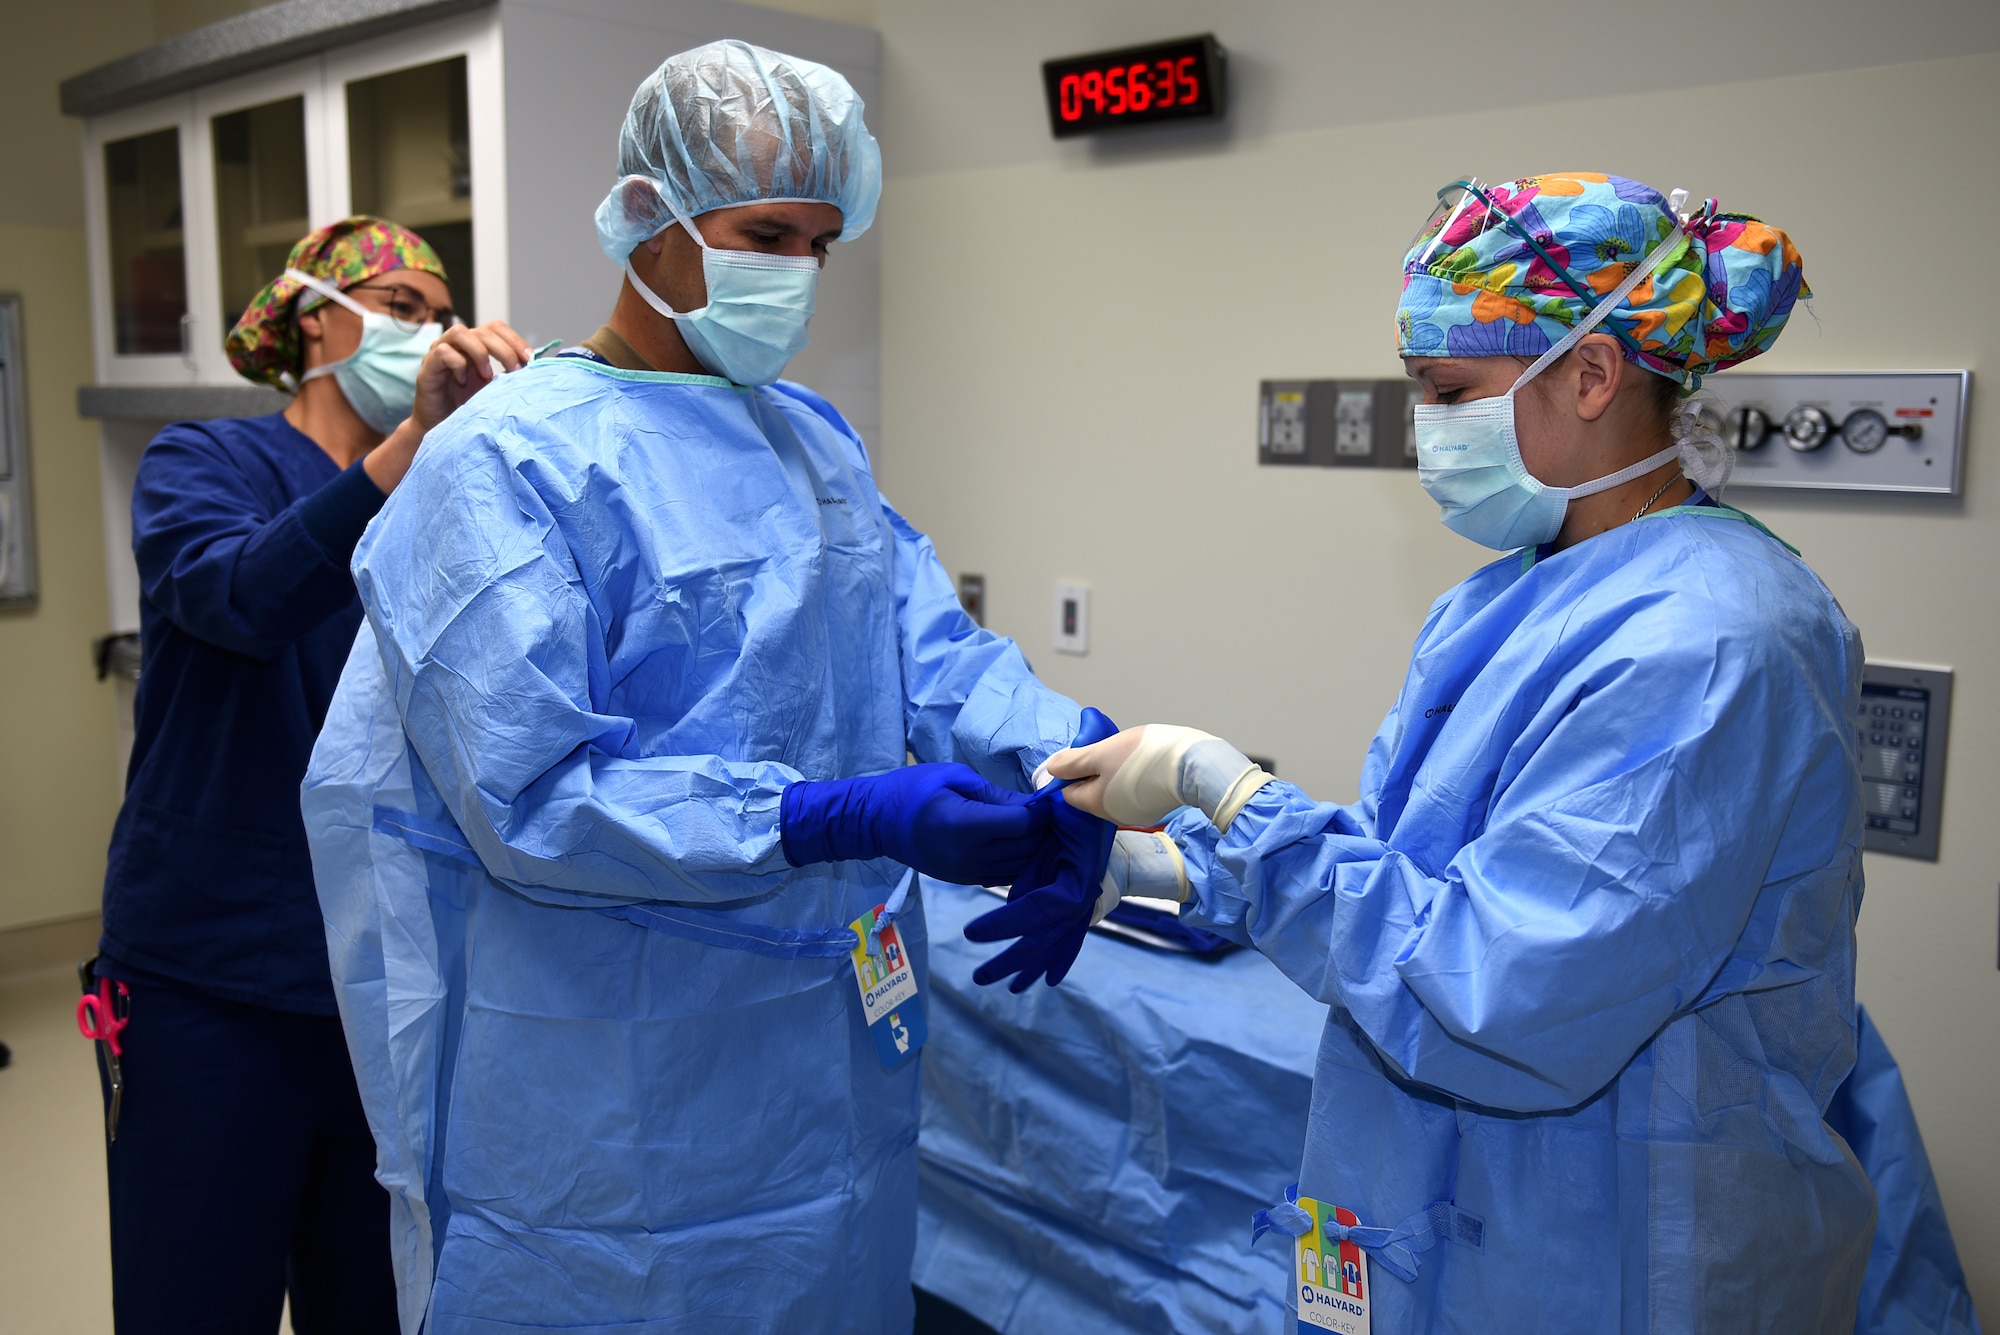 U.S. Air Force 1st Lt. Shawna Larson, left, 60th Surgical Operations Squadron operating room nurse, and Senior Airman Anjeanette Ramos, right, 60th SGCS surgical technician, help Col. Zachery Jiron, 60th Air Mobility Wing vice commander, put on a sterile gown Aug. 8, 2019, at David Grant USAF Medical Center Travis Air Force Base, California. As part of the Leadership Rounds program, Jiron participated in a simulated surgery to get a firsthand experience of all the precautions medical staff take before every surgery. (U.S. Air Force photo by Airman 1st Class Cameron Otte)